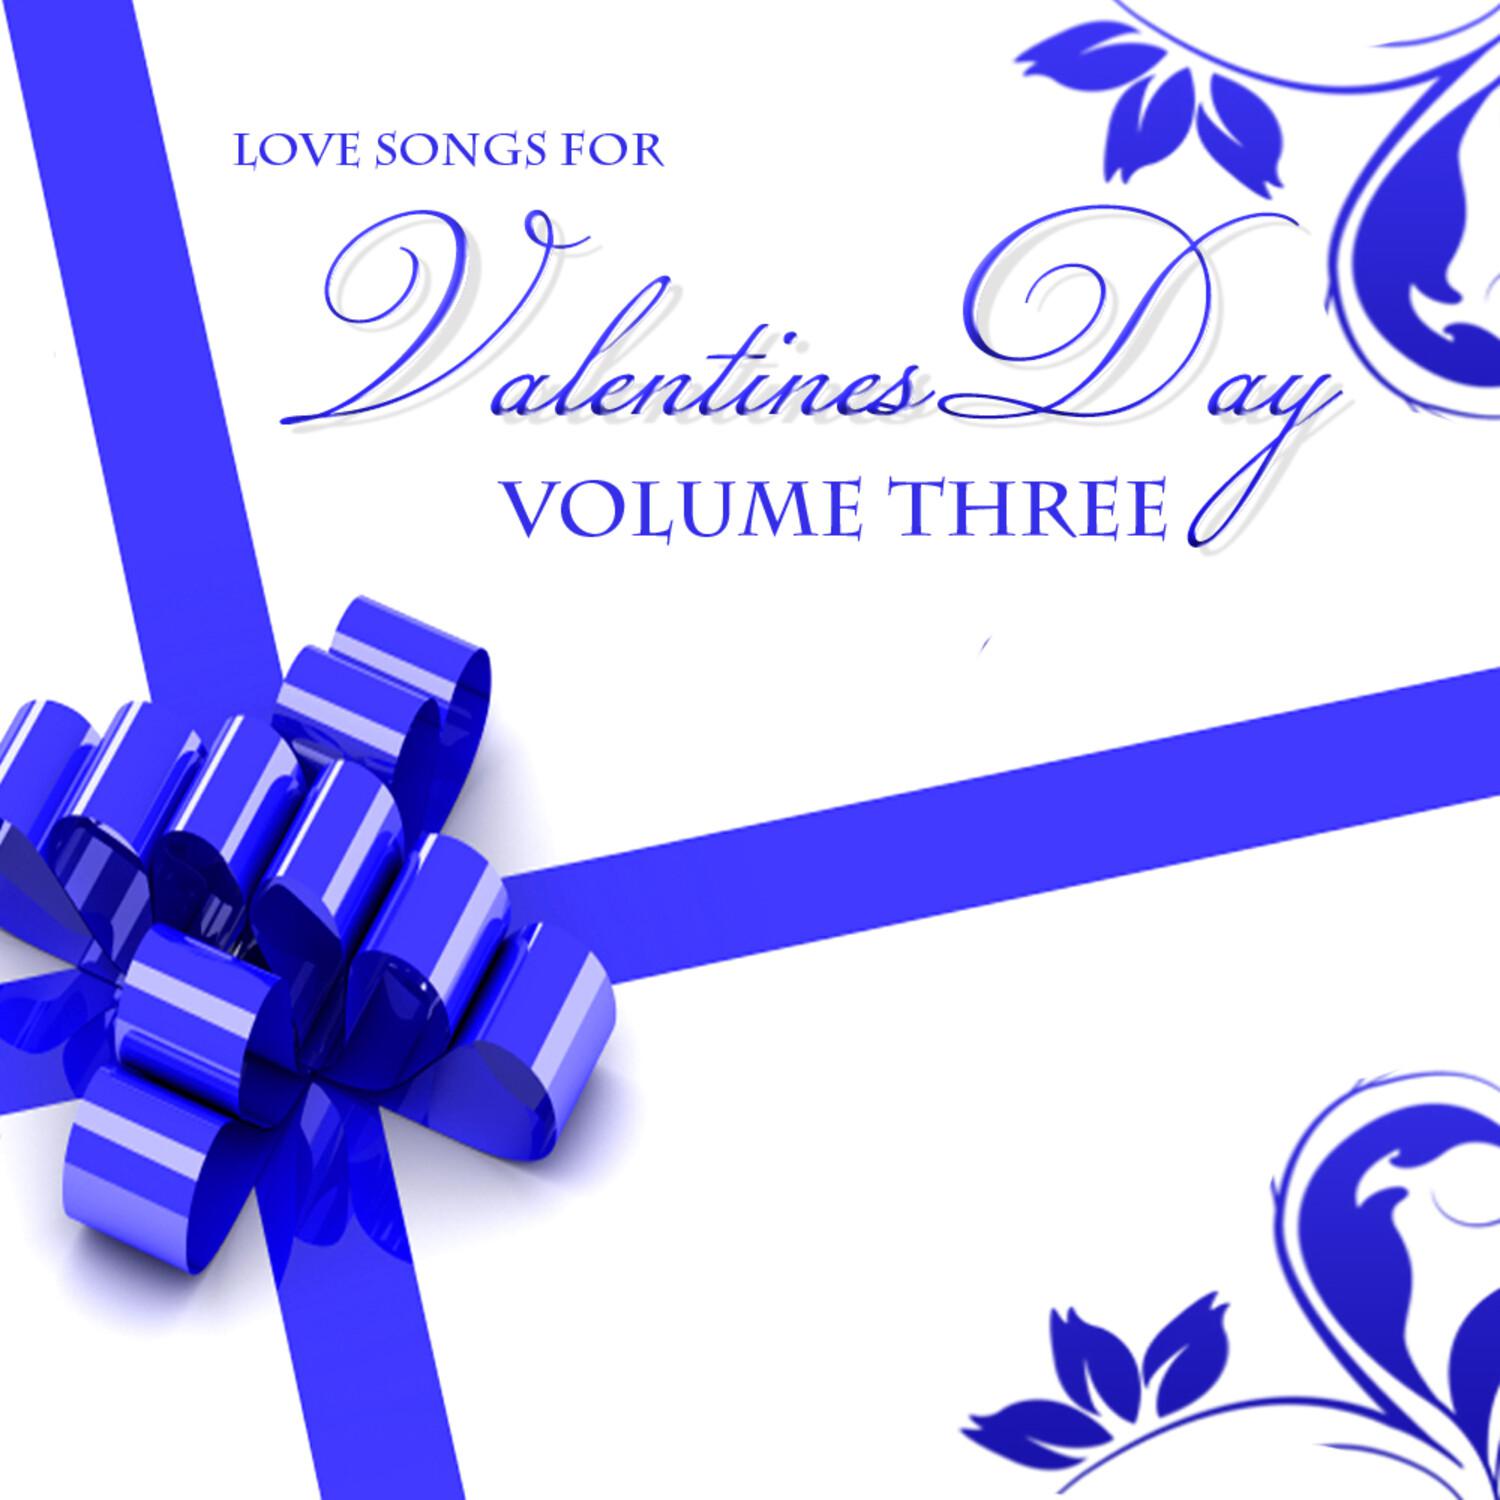 Love Me Tender & Other Great Love Songs For Valentine